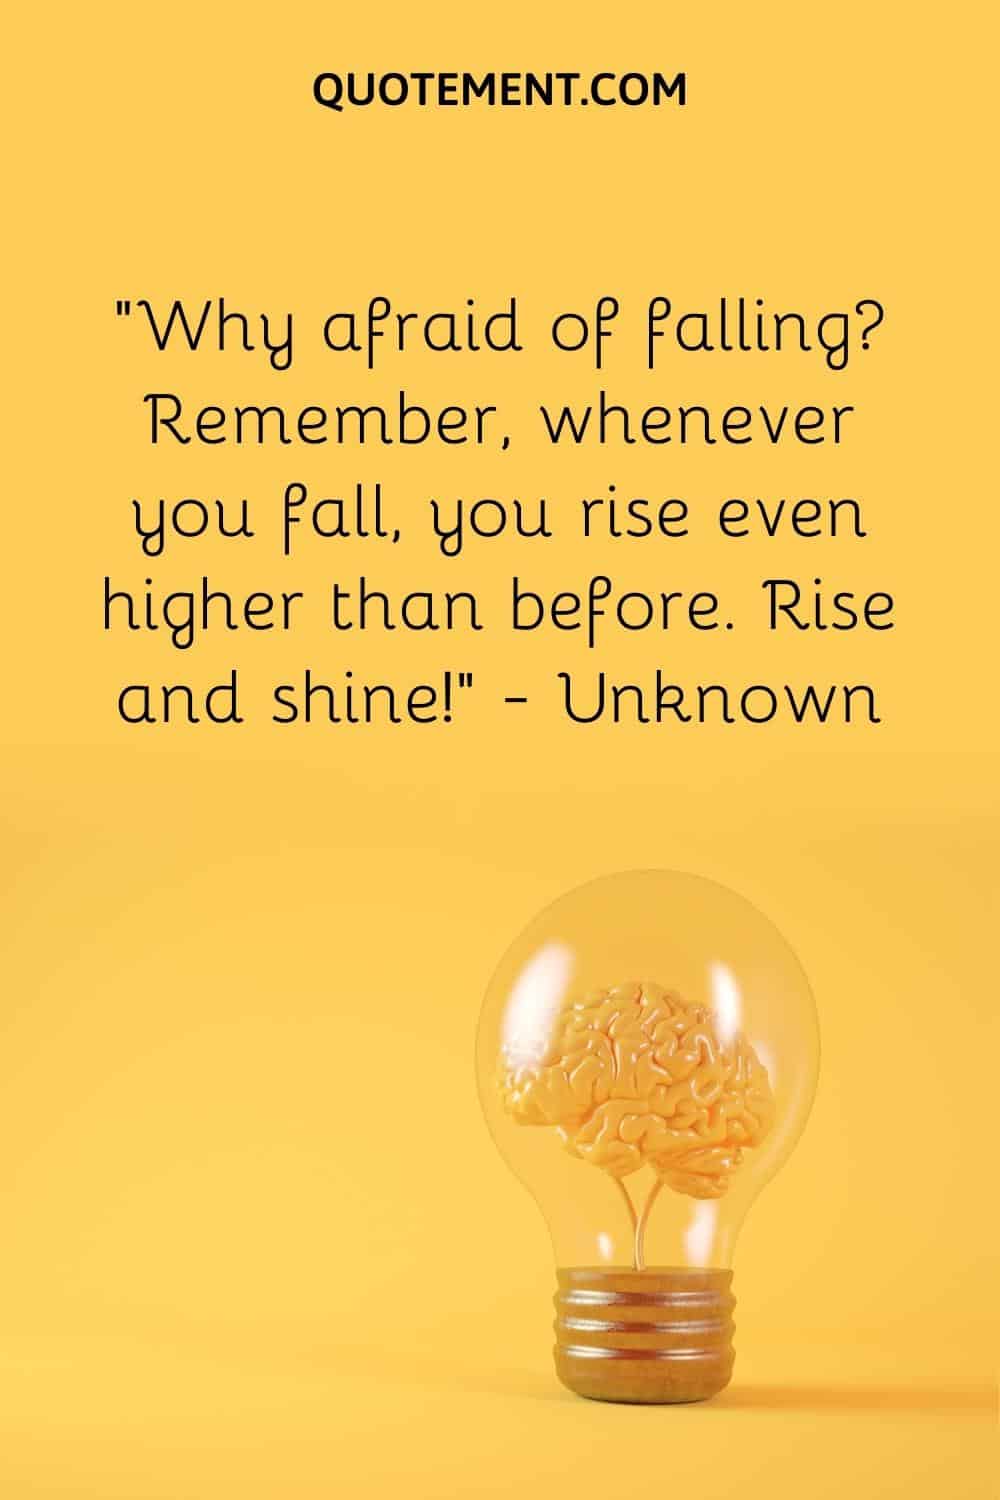 “Why afraid of falling Remember, whenever you fall, you rise even higher than before. Rise and shine!” — unknown